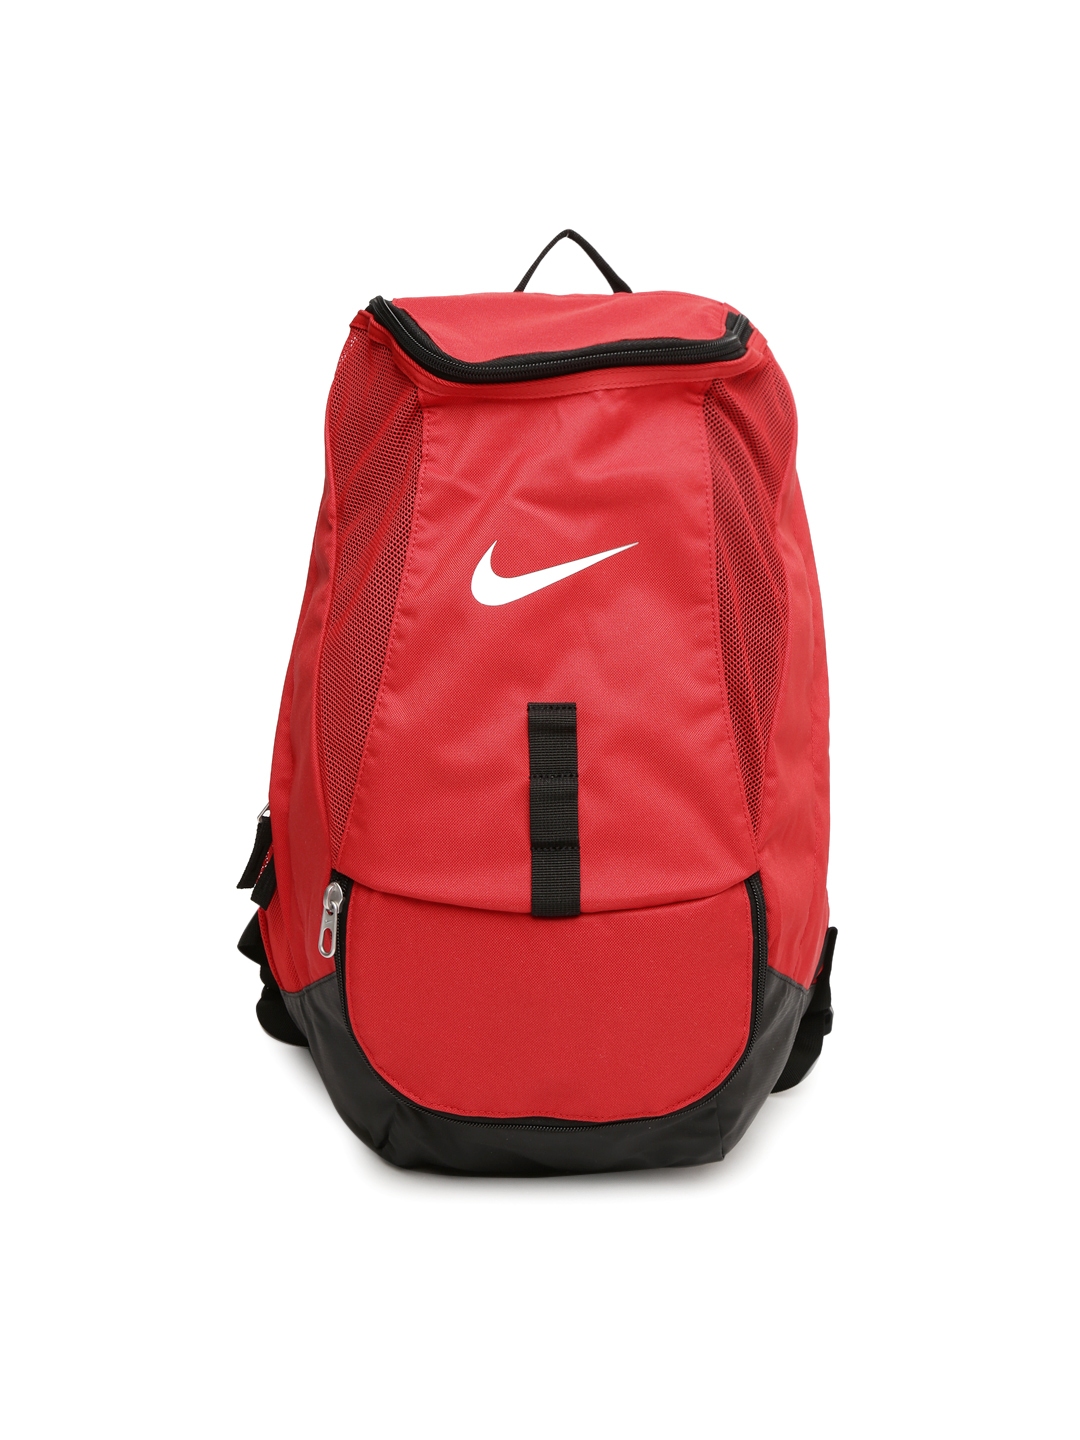 Latest Reebok Bags arrivals - Men - 5 products | FASHIOLA.in